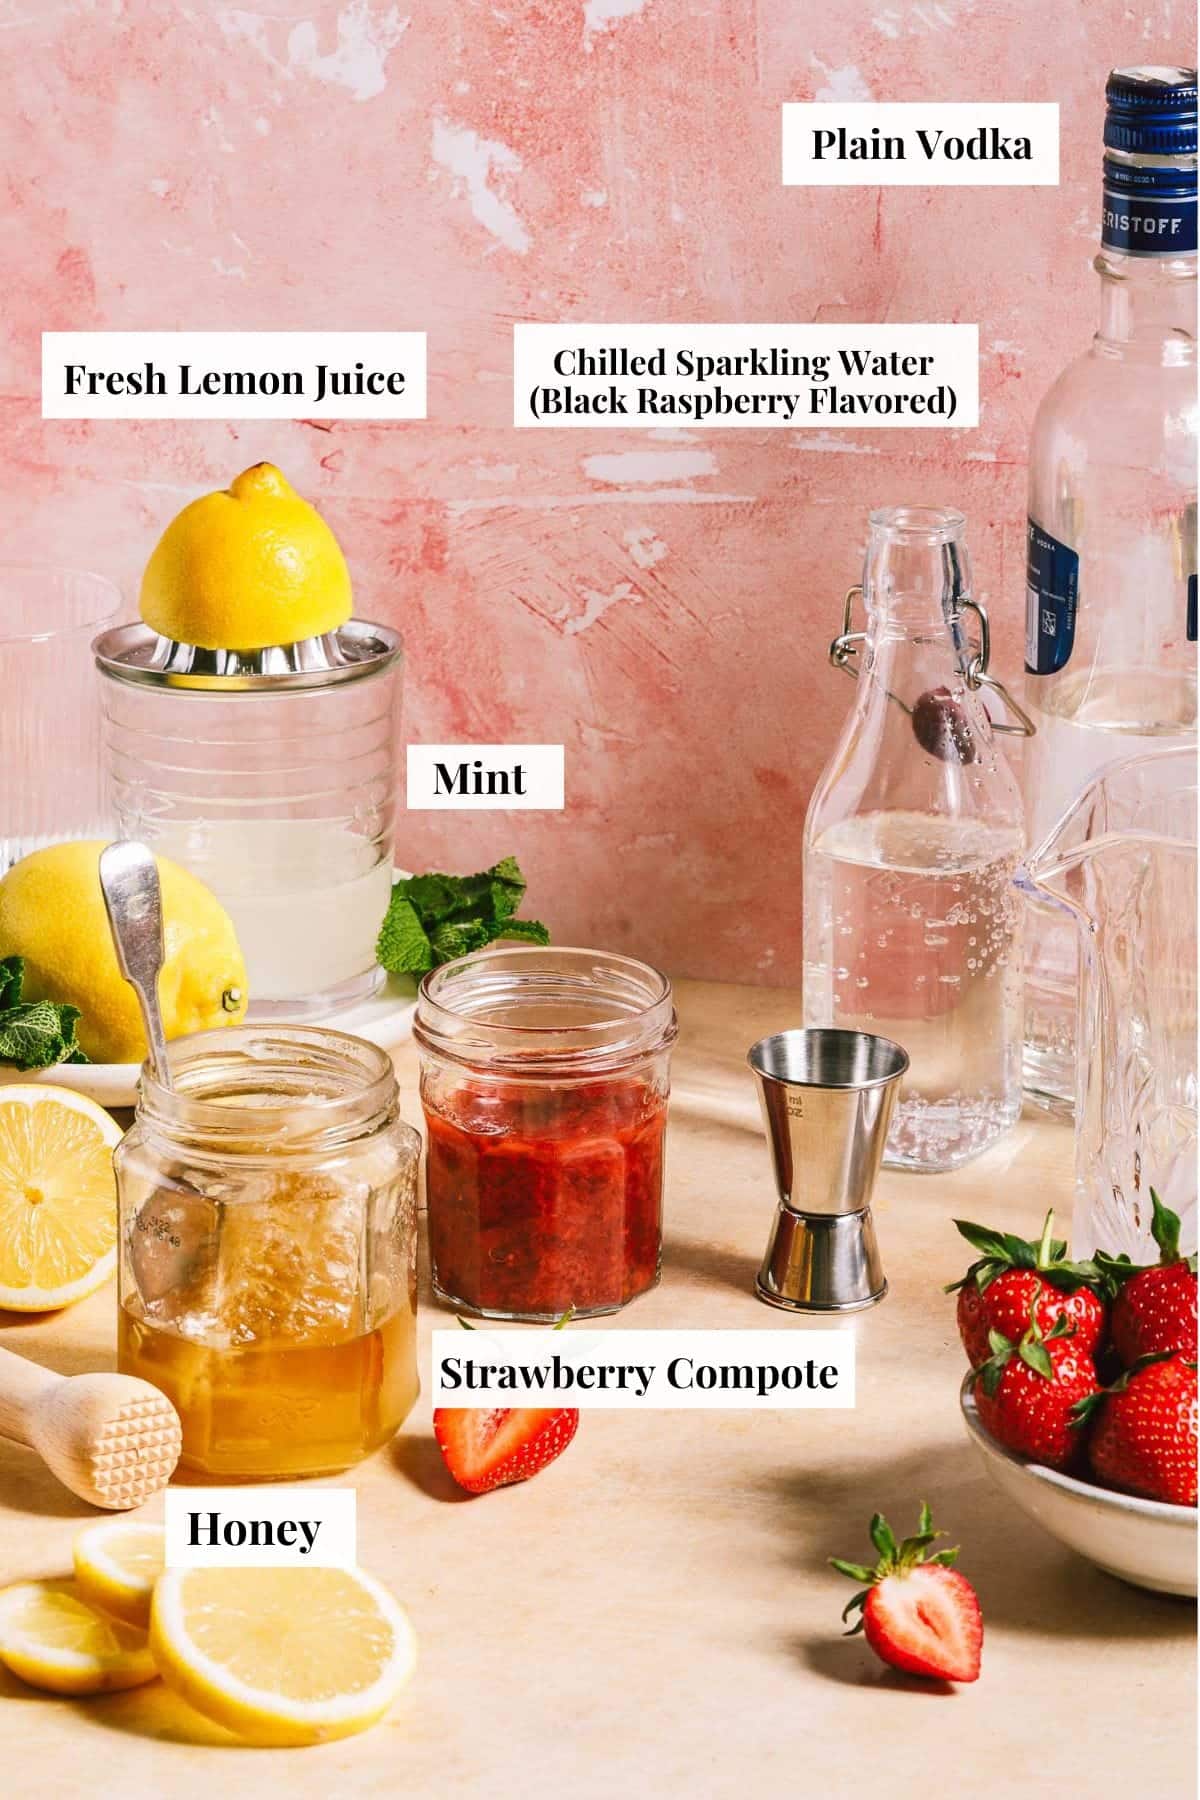 Image shows what you can mix with strawberry vodka with fresh fruit ingredients.